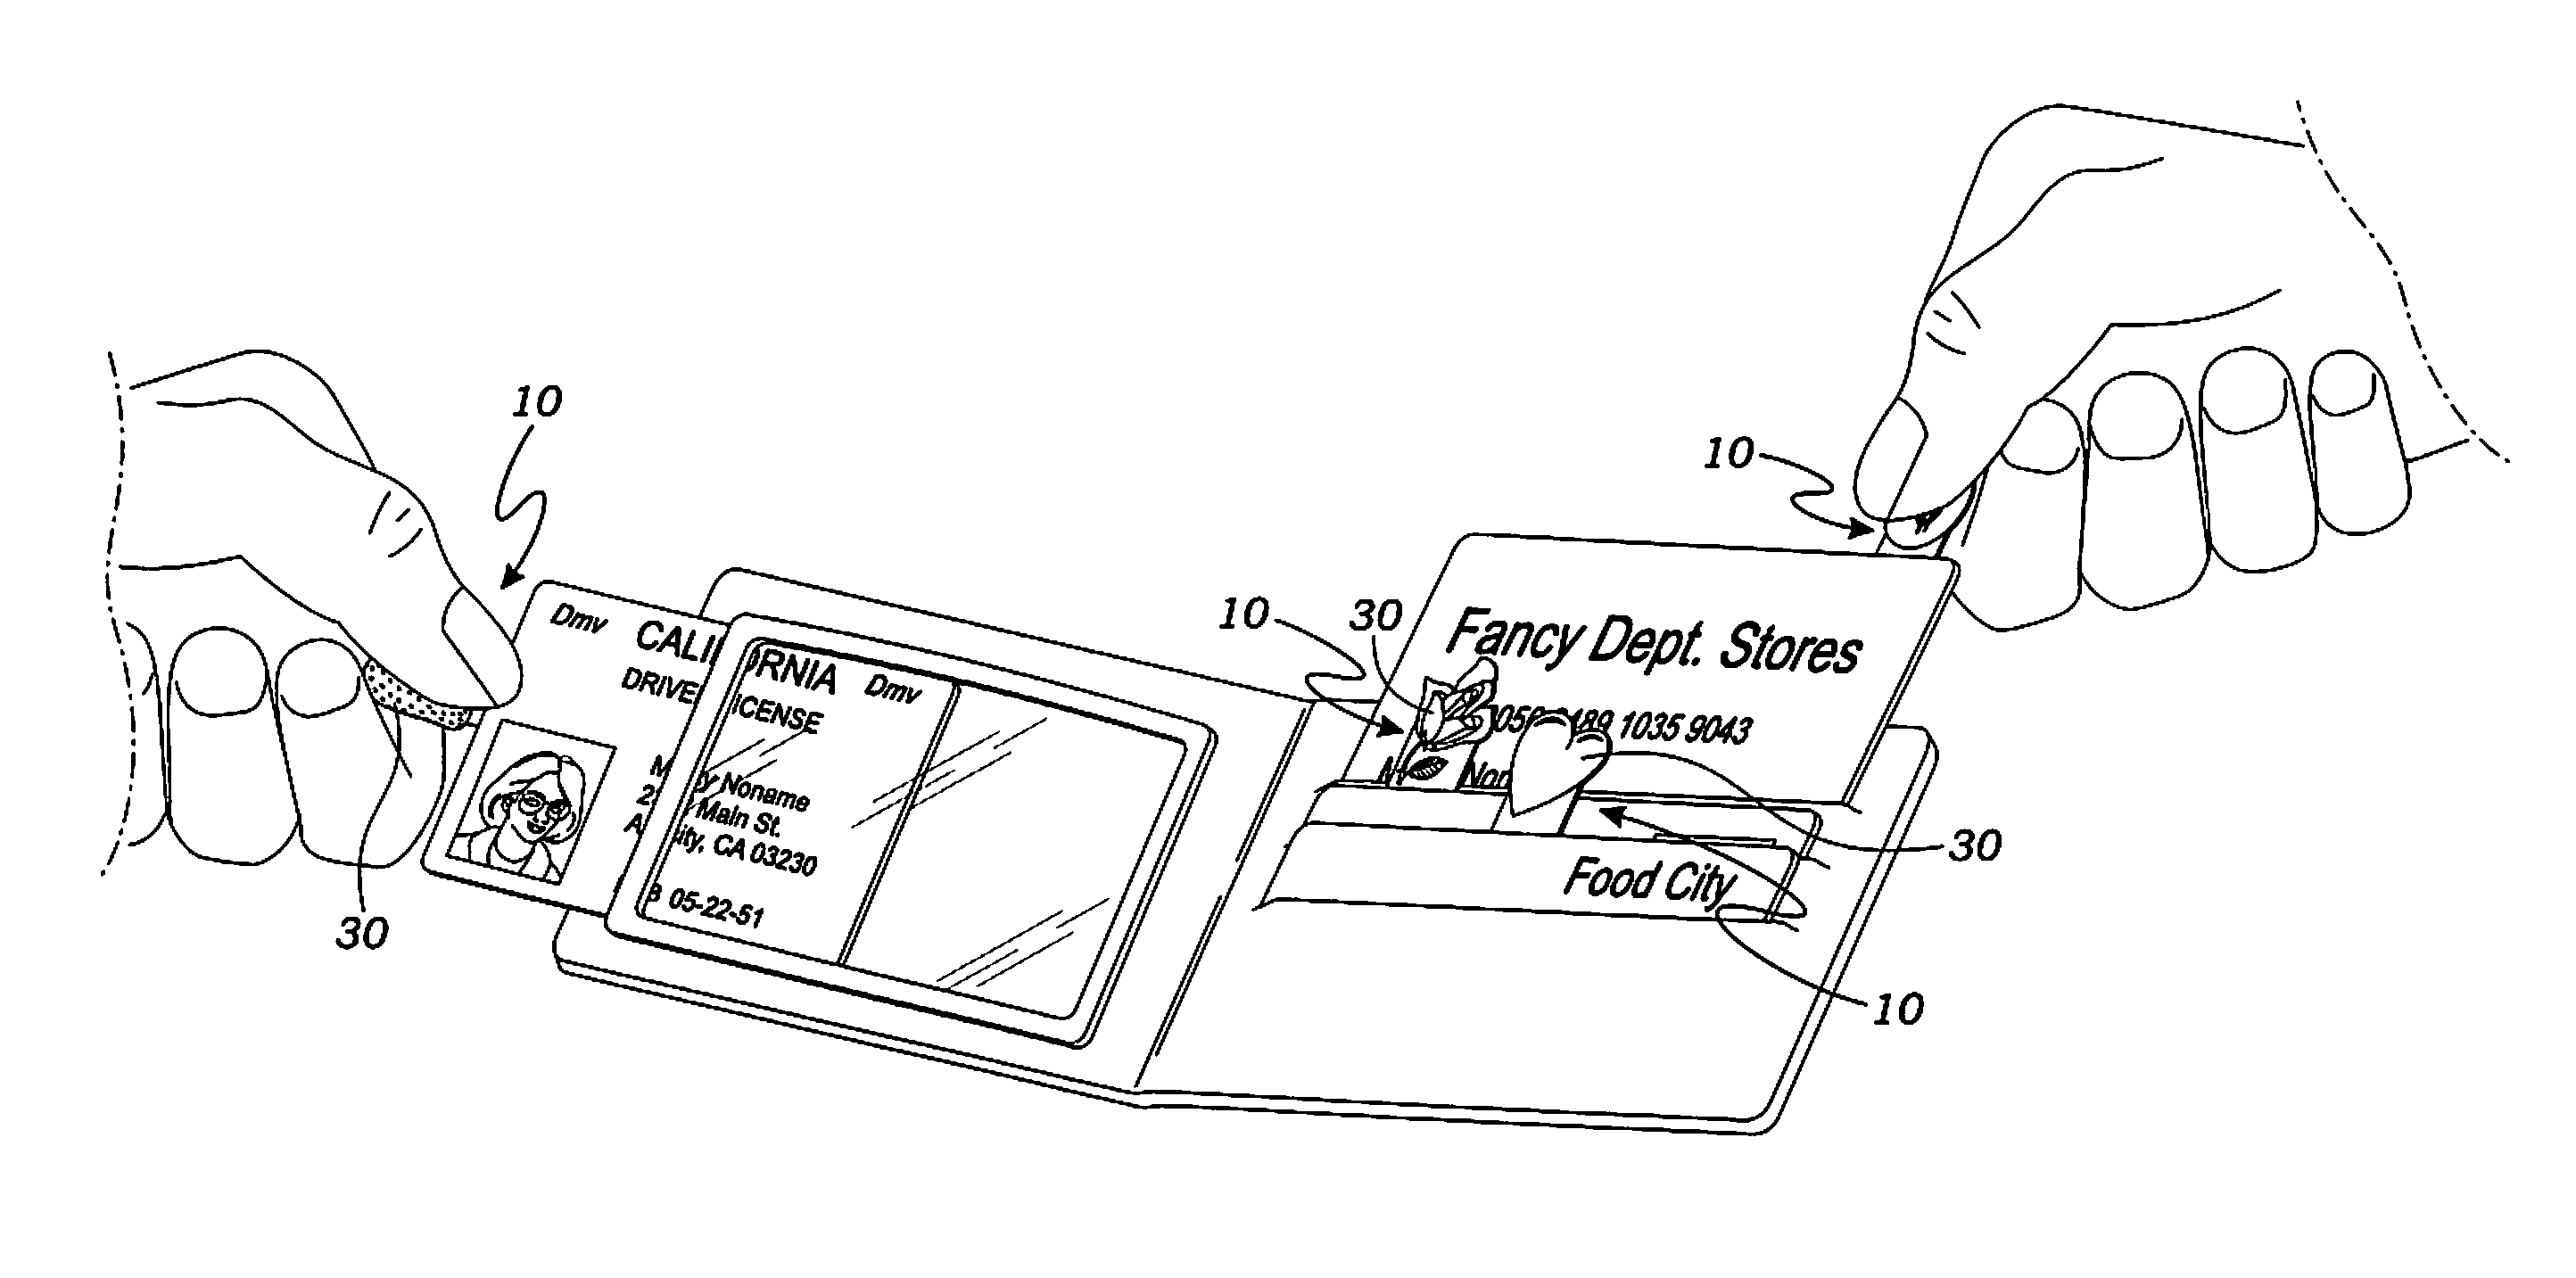 Apparatus and method for assisting the retrieval of identification or credit cards from a wallet